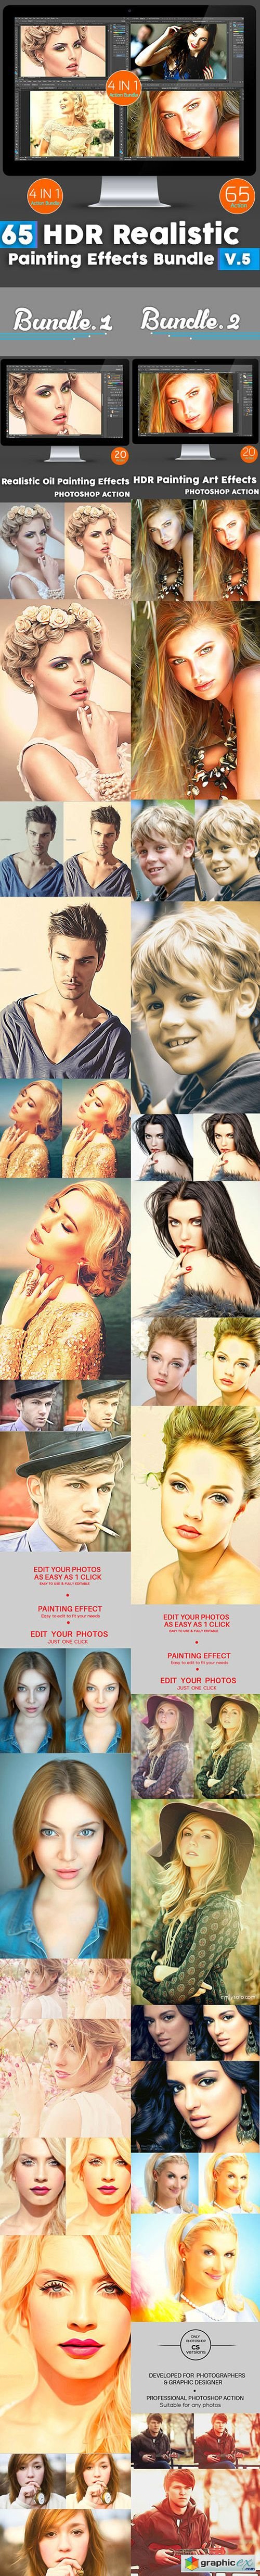 65 HDR Realistic Painting Effects Bundle V.5